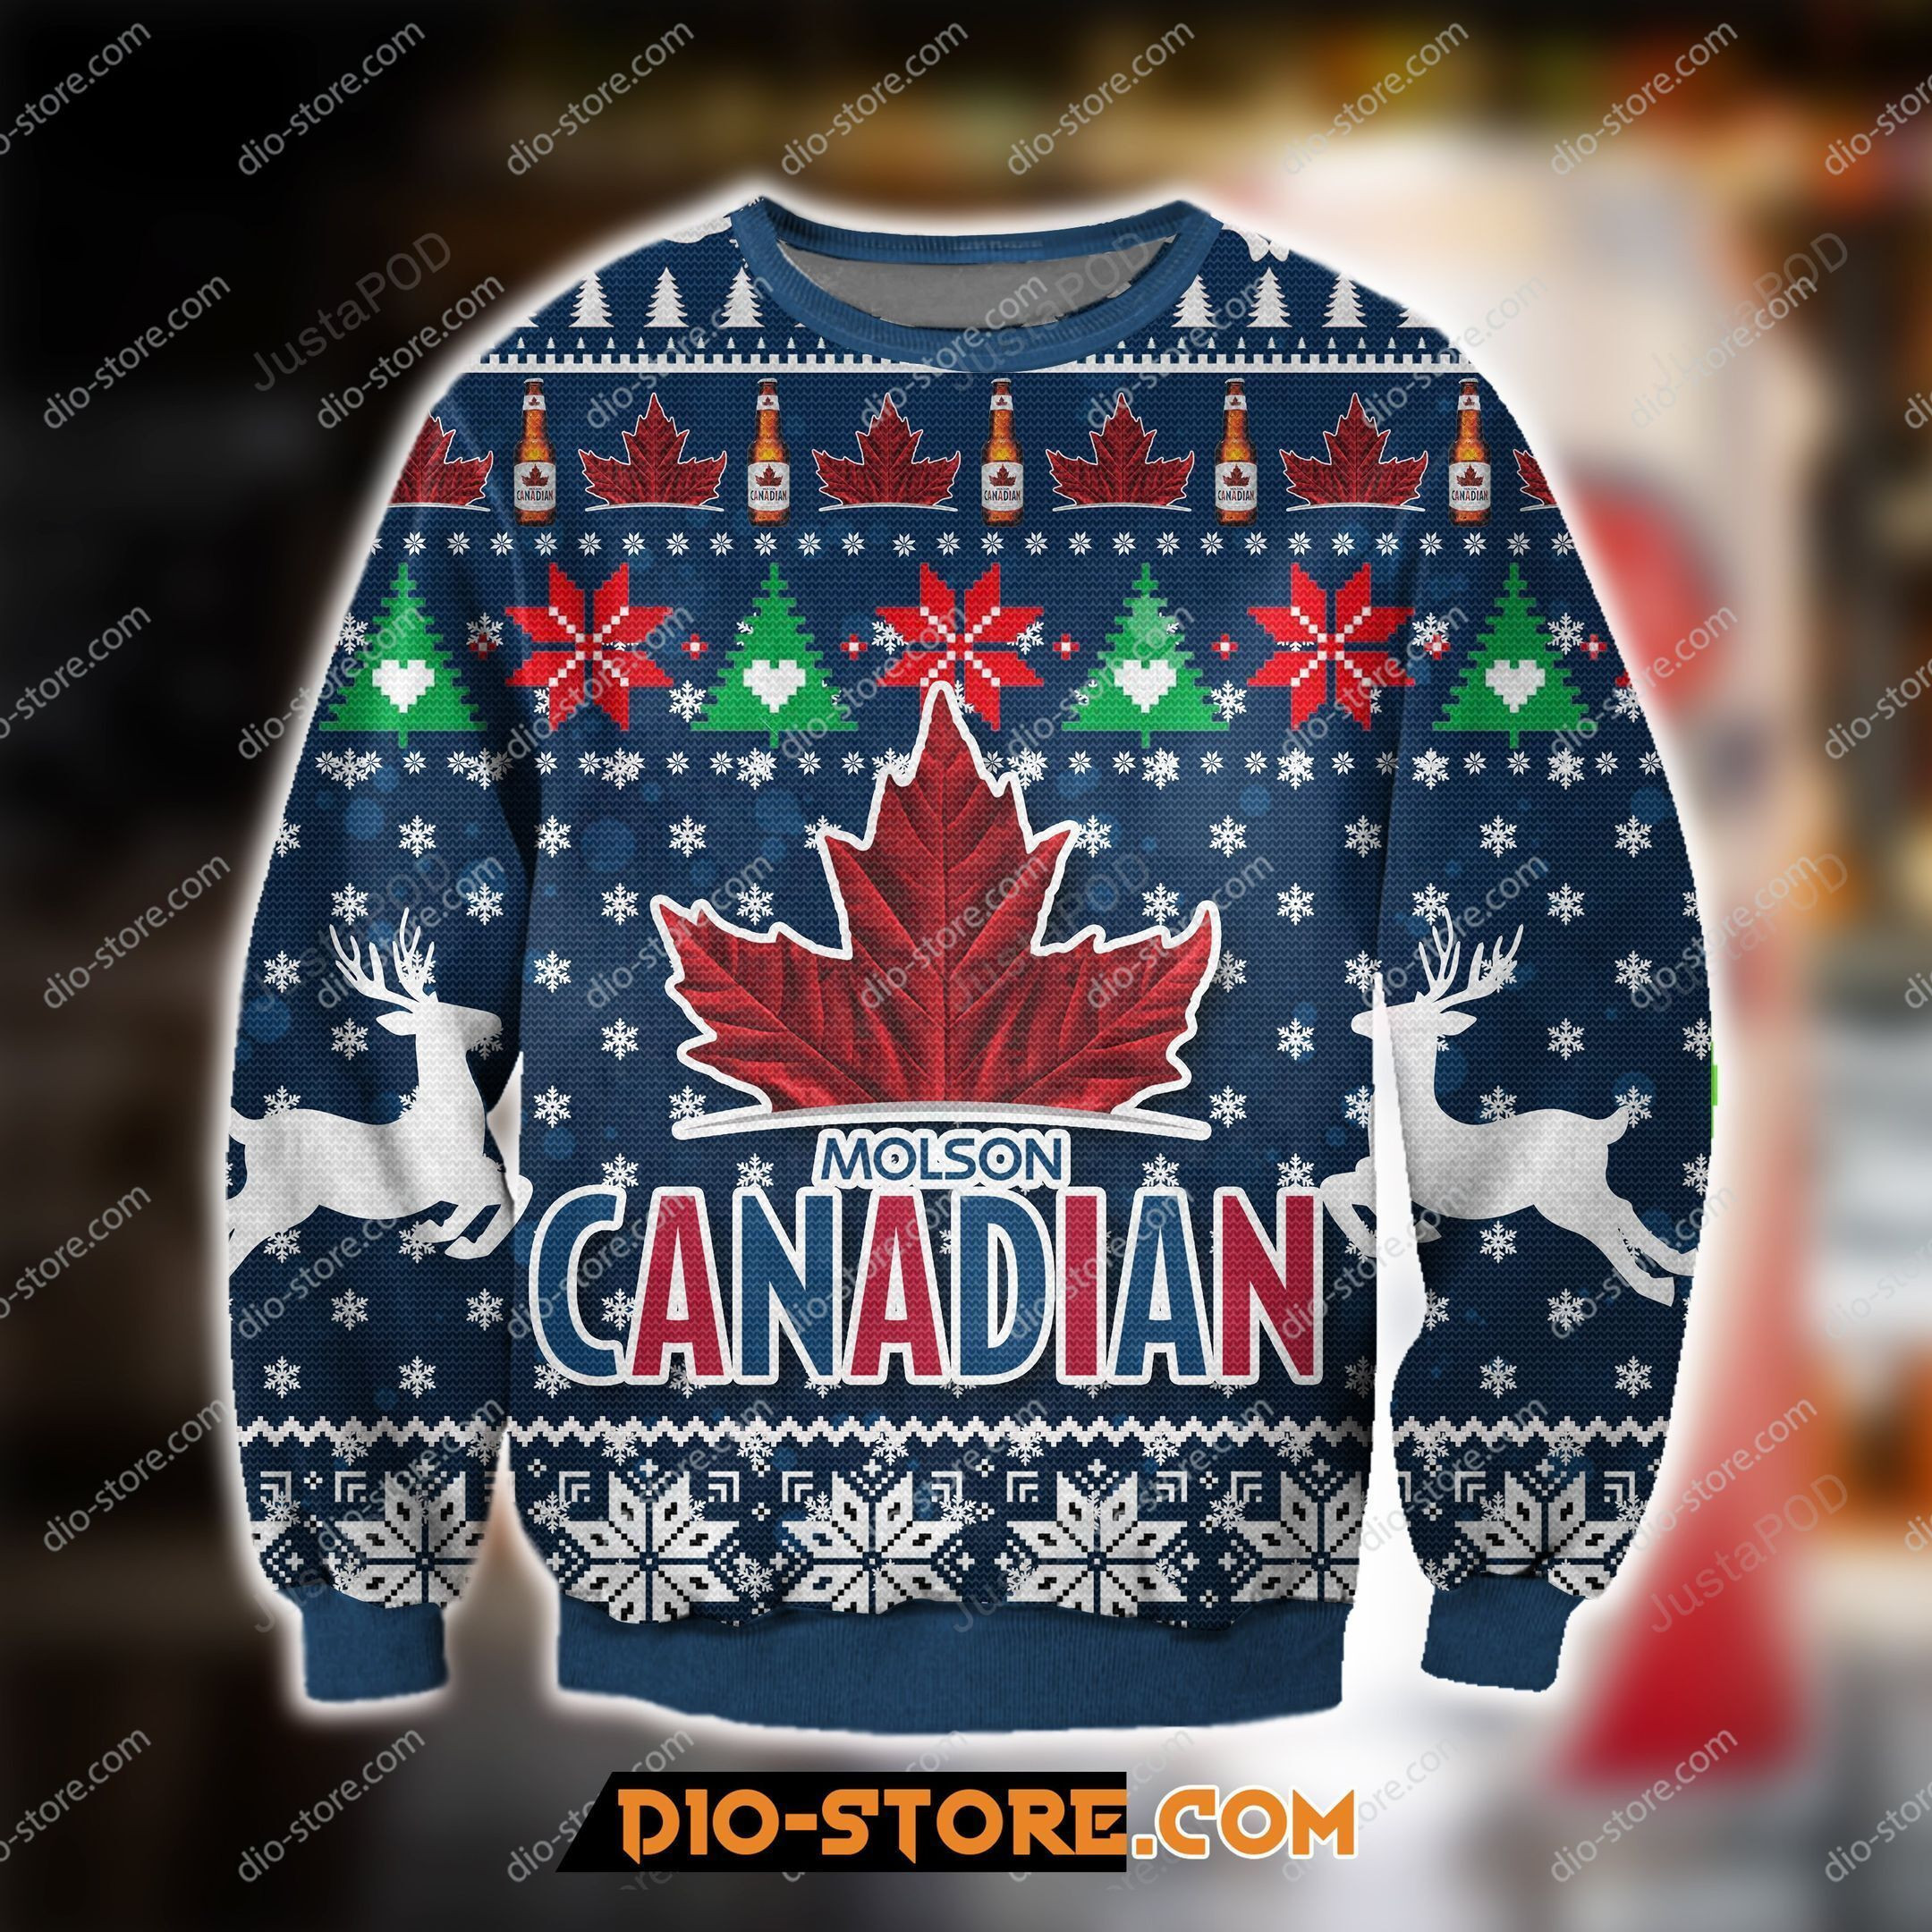 Molson Canadian Beer Knitting Pattern Ugly Christmas Sweater All Over